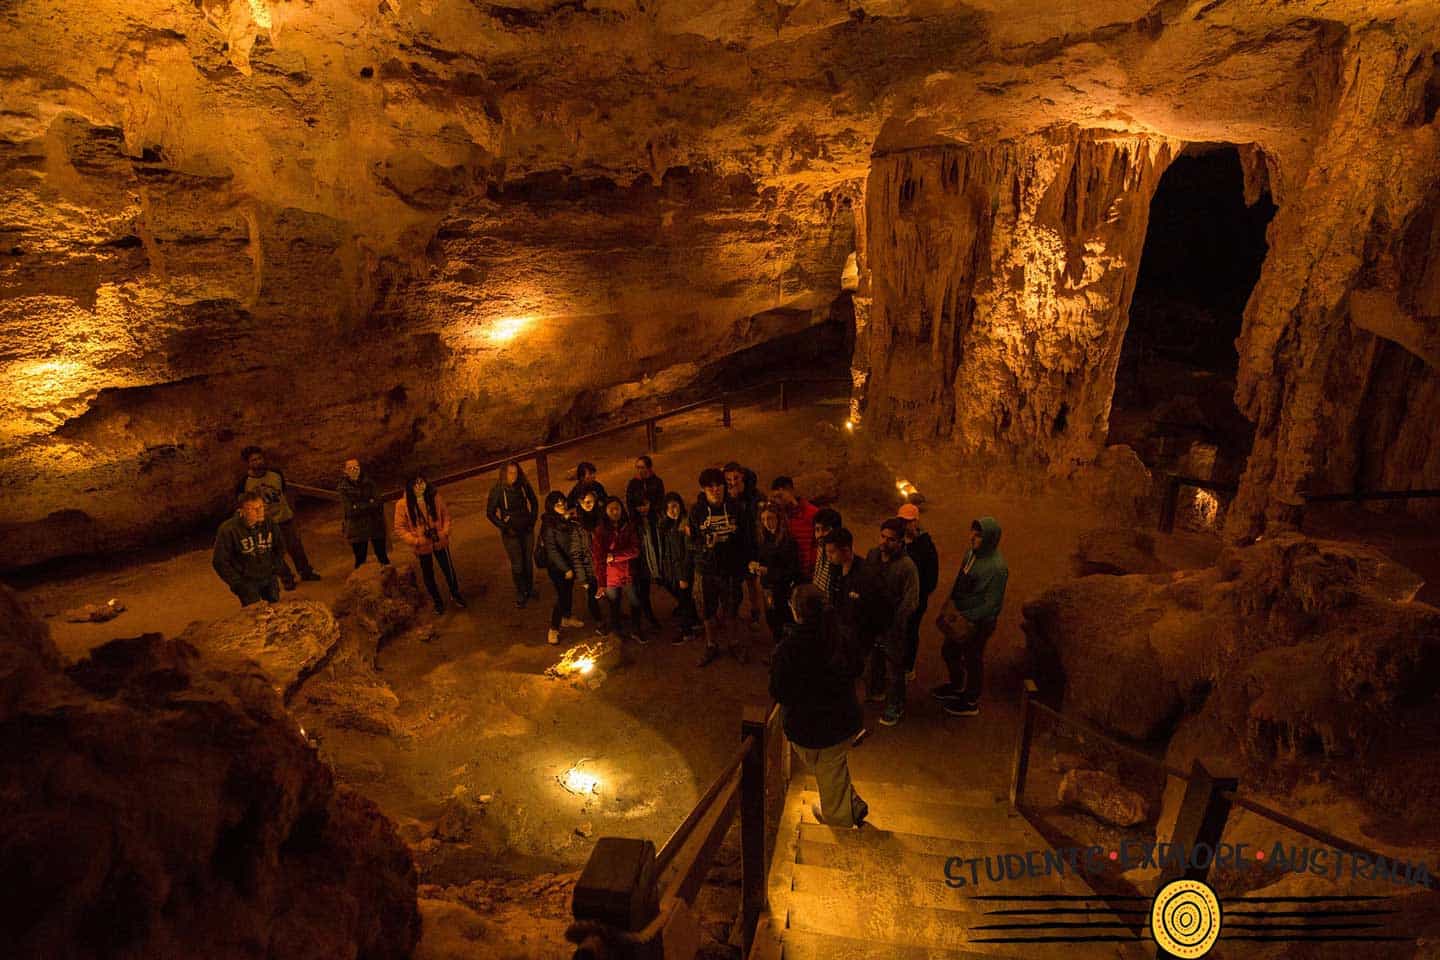 Students inside Naracoorte Caves